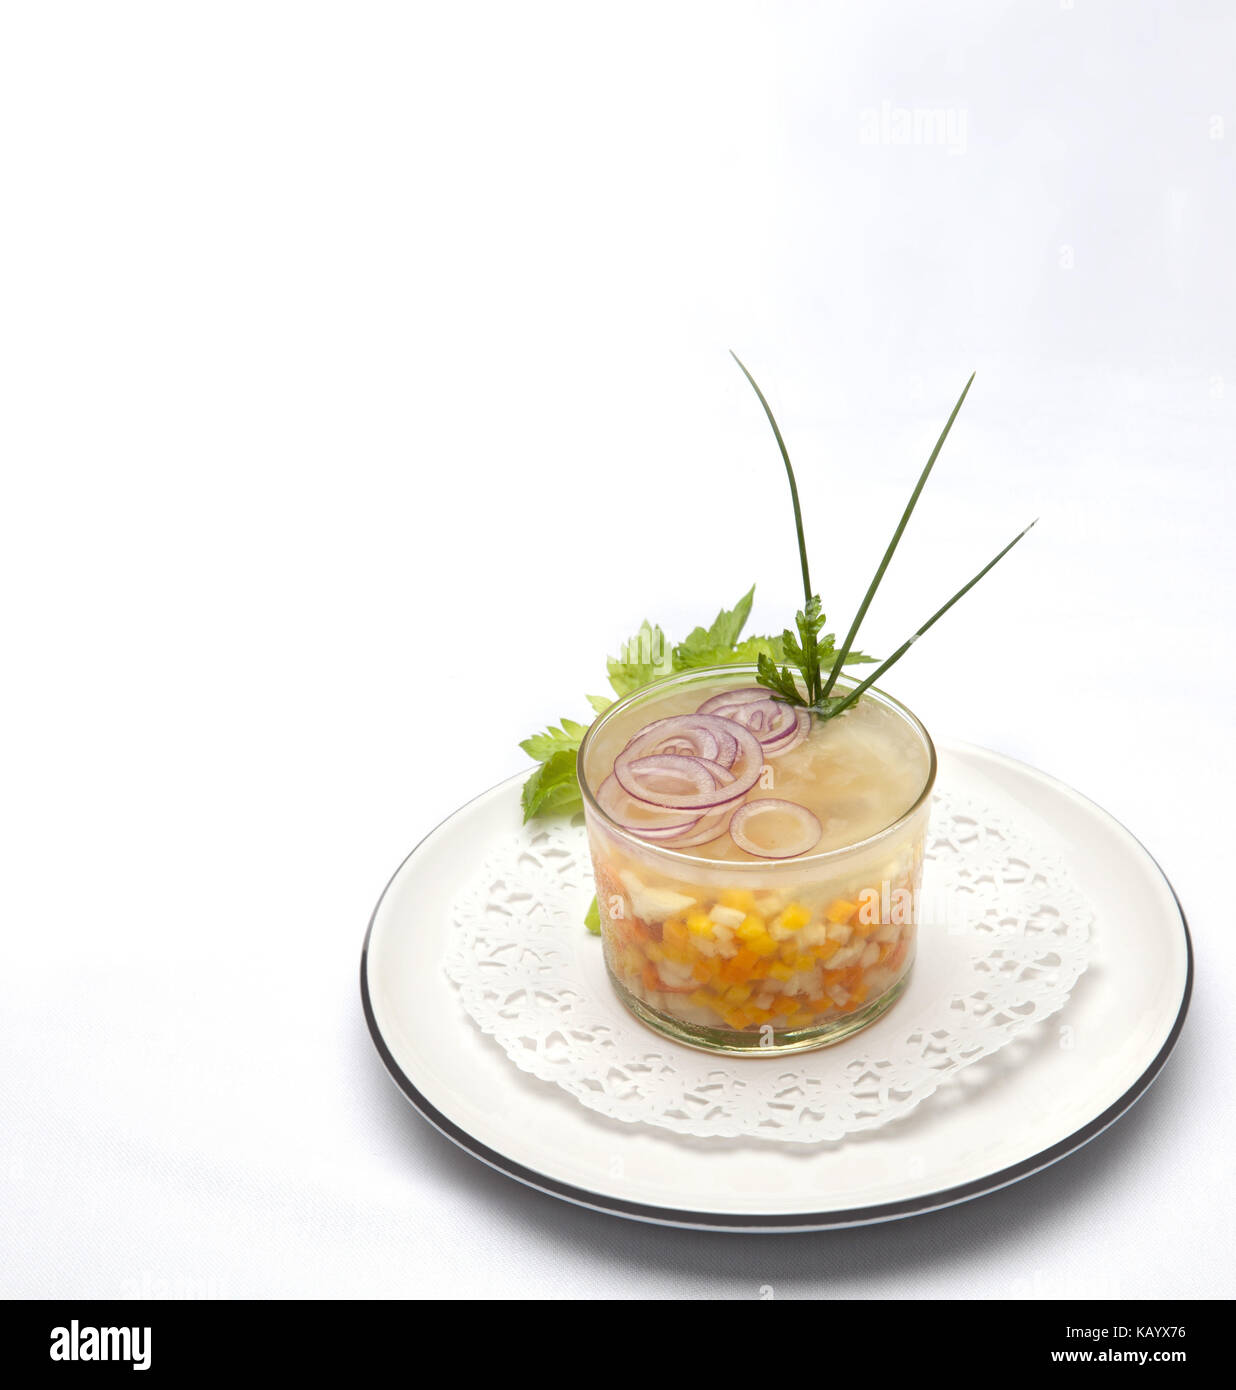 Fish aspic in a glass, Stock Photo